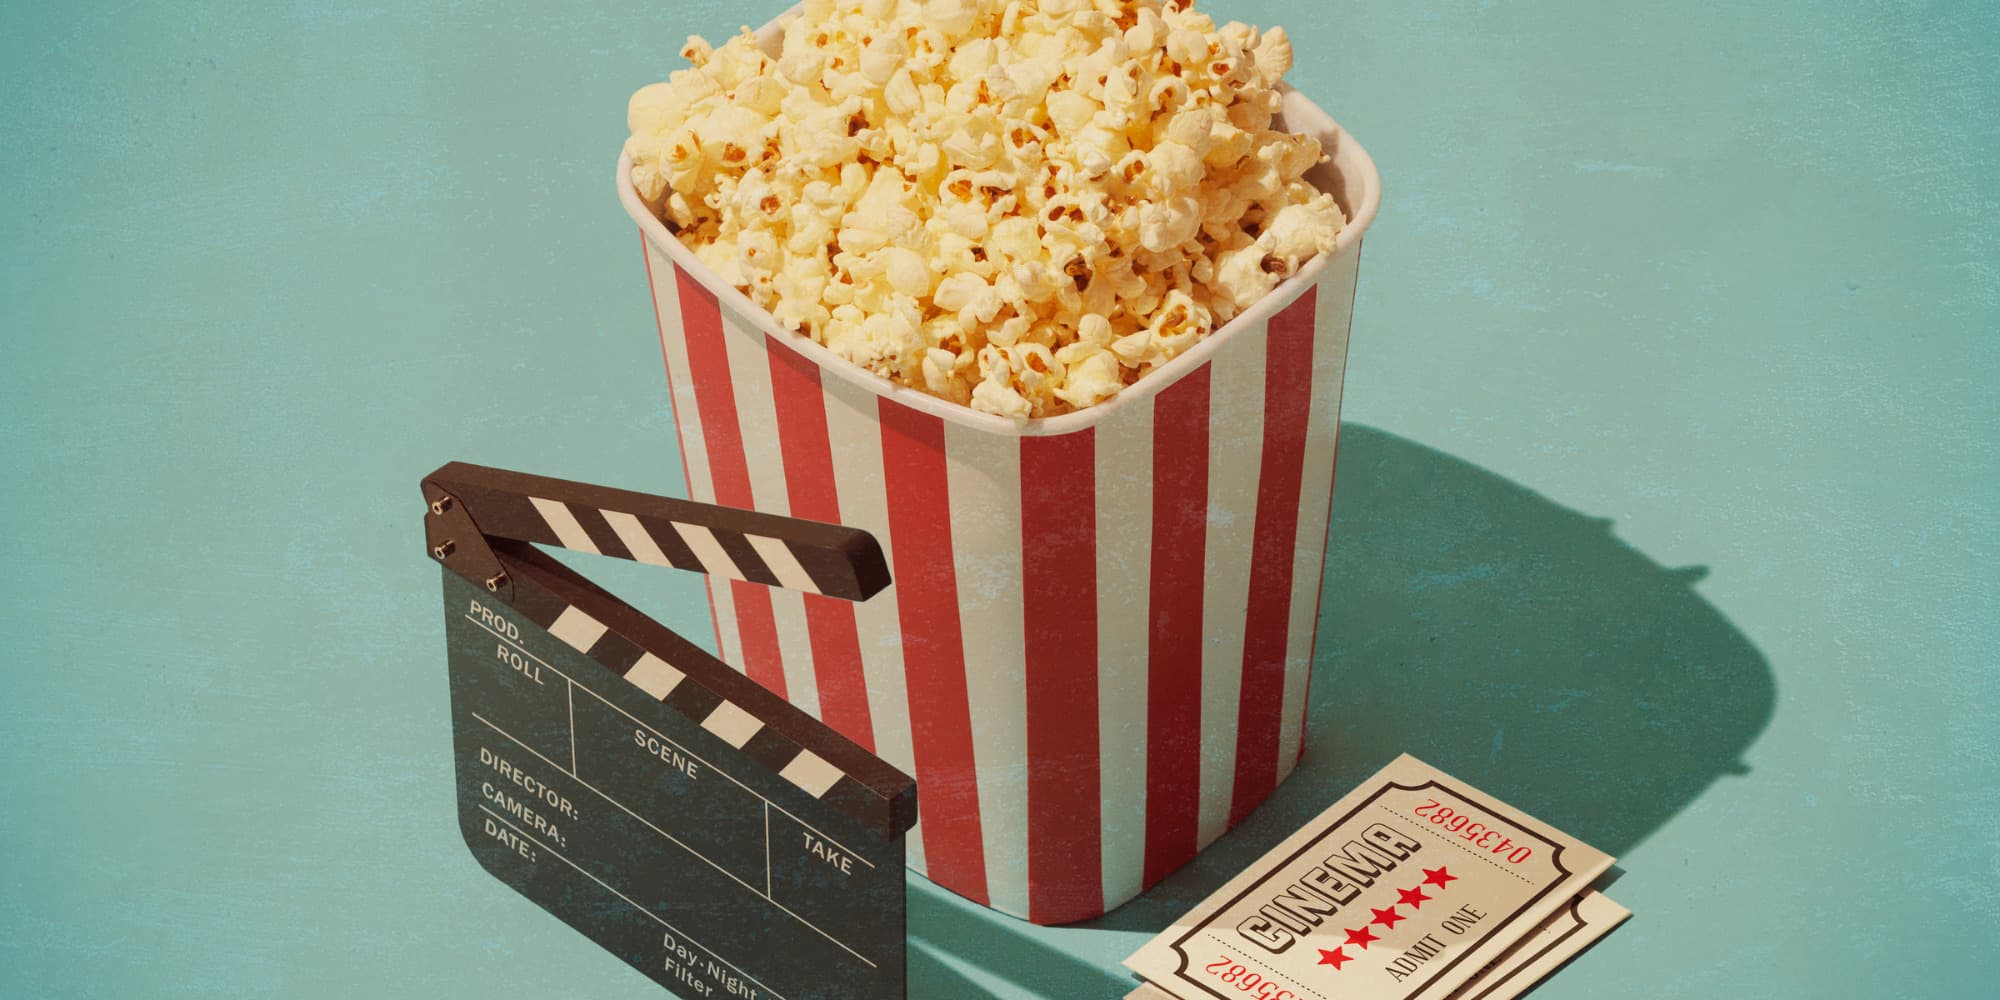 A box of popcorn, a movie clapboard and two cinema tickets displayed on a teal surface.